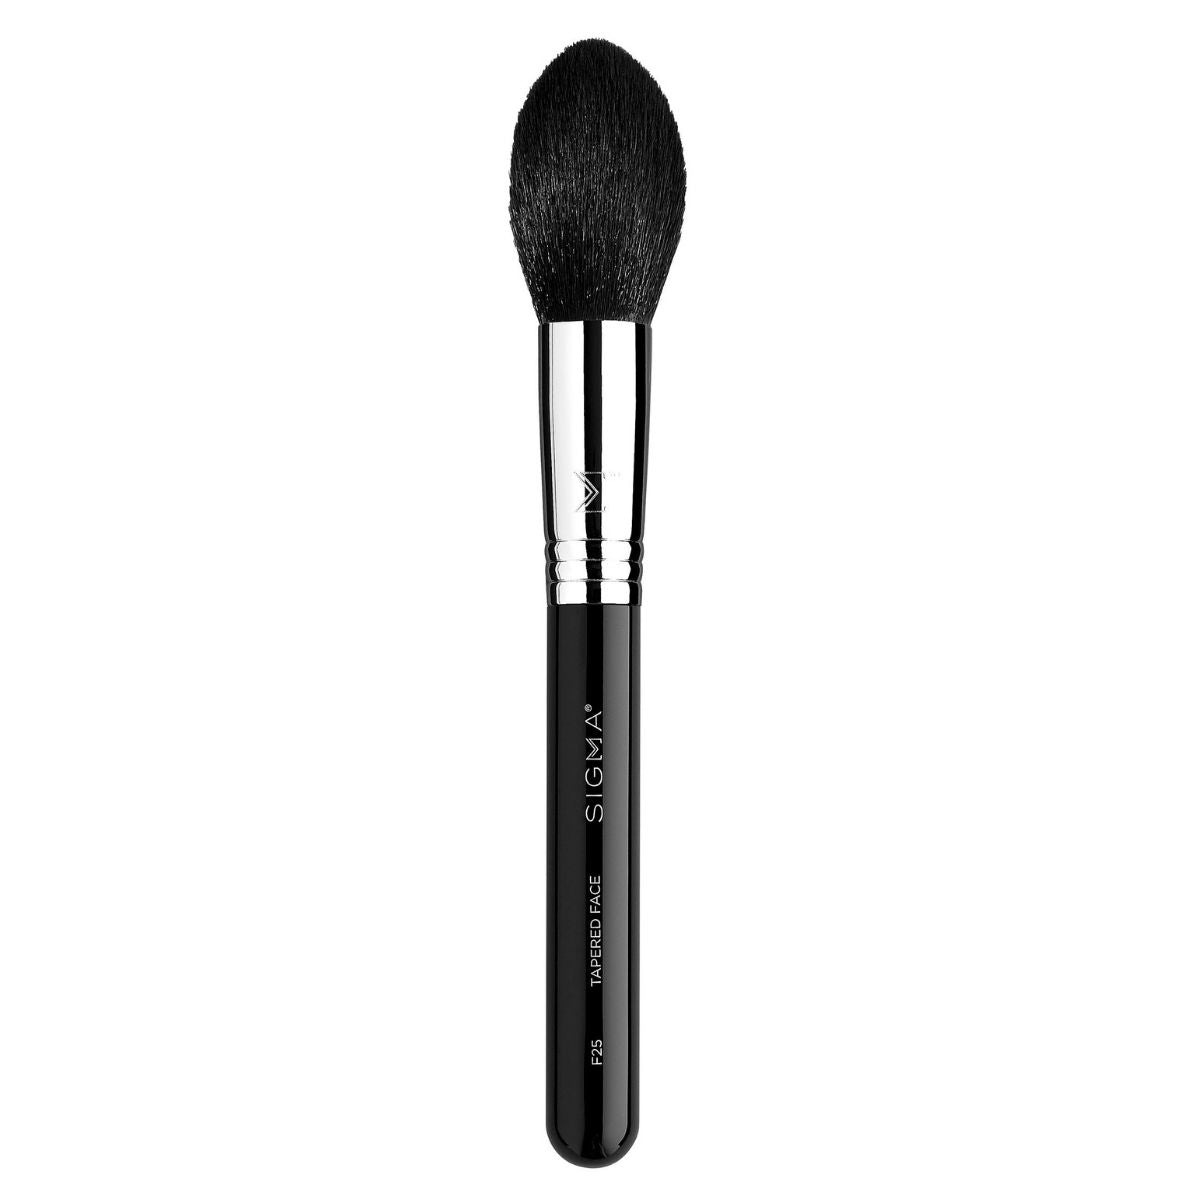 Sigma F25 Tapered Face Brush. 30% off